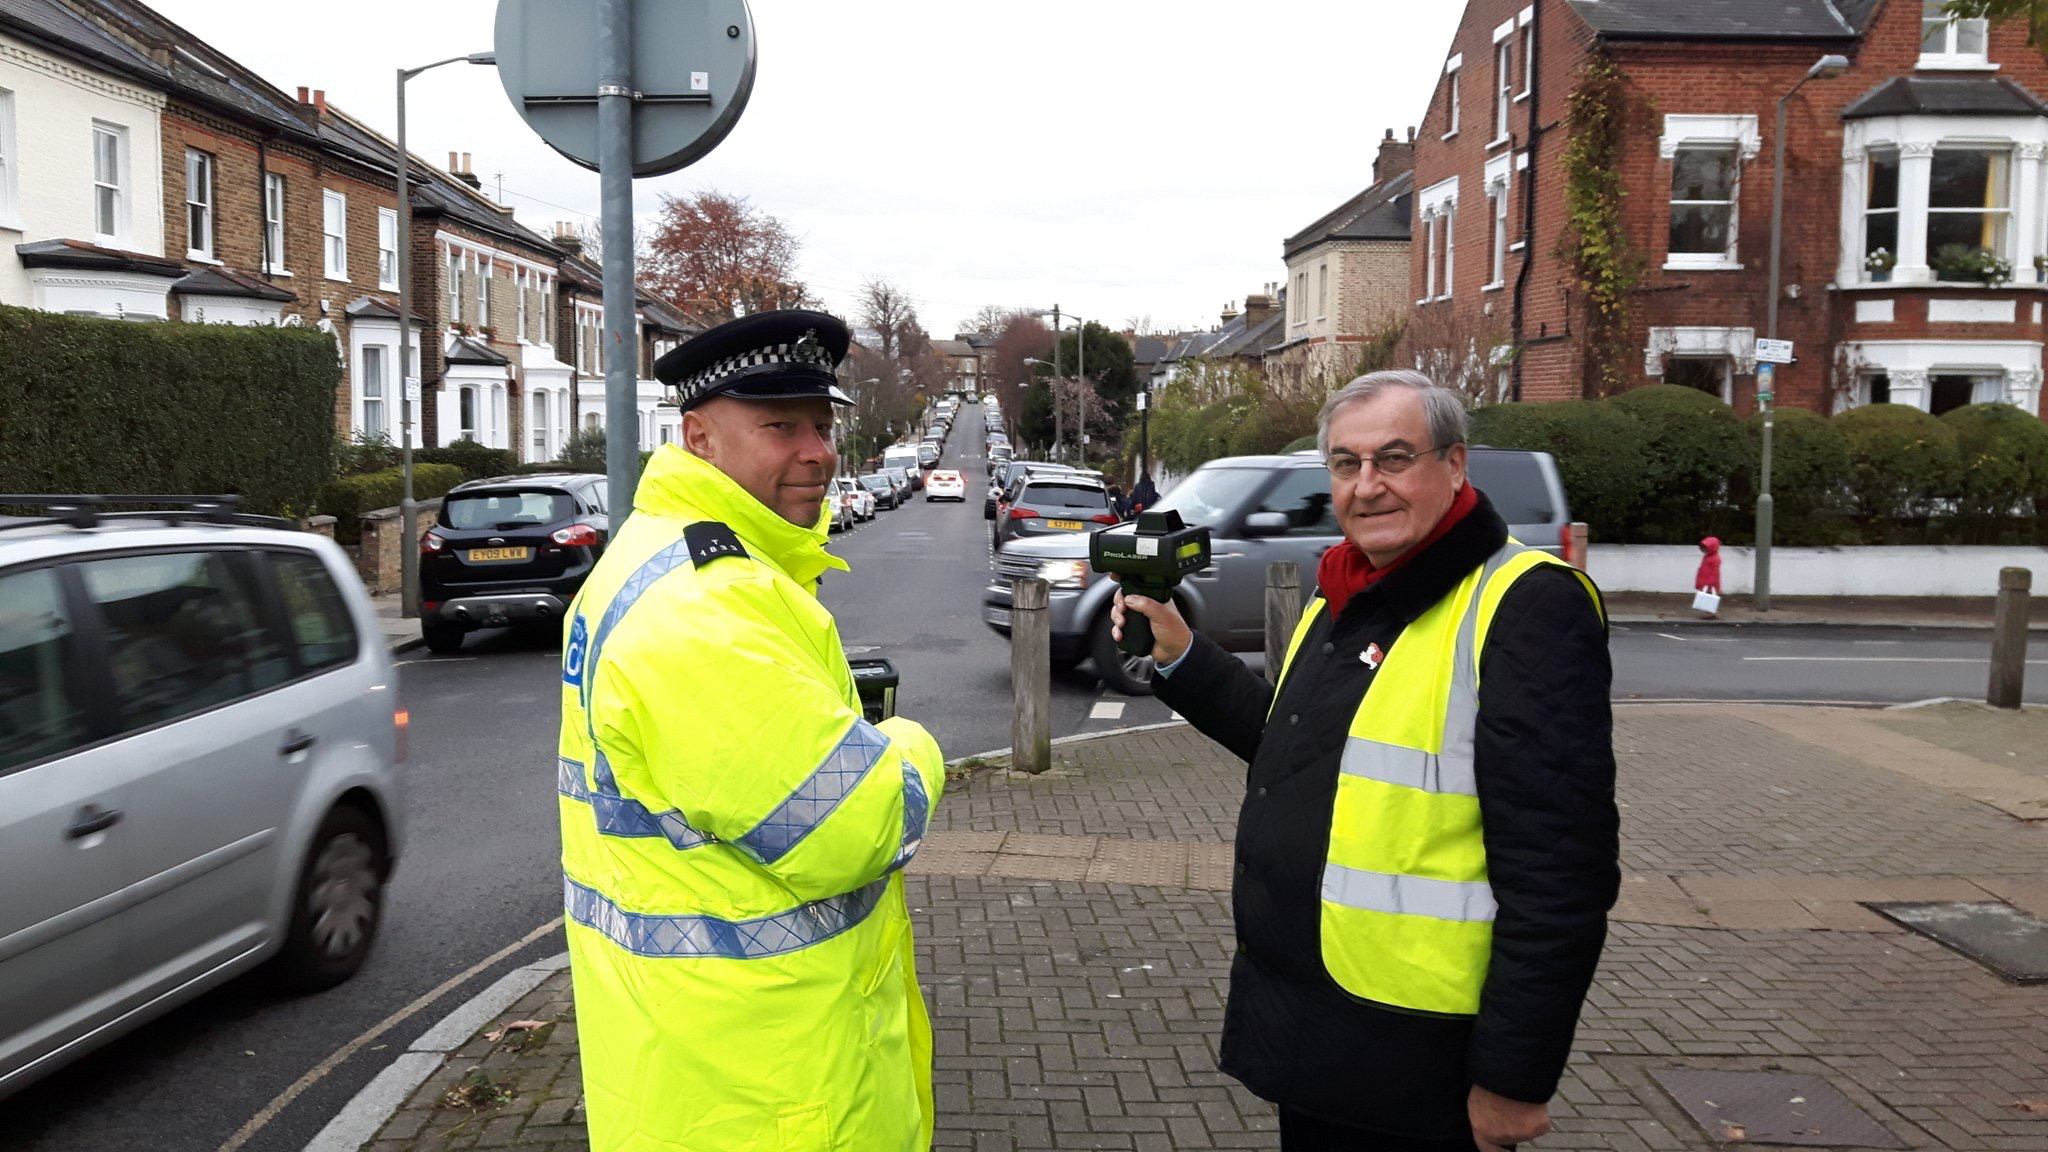 Your councillors and local police working to reduce speeding